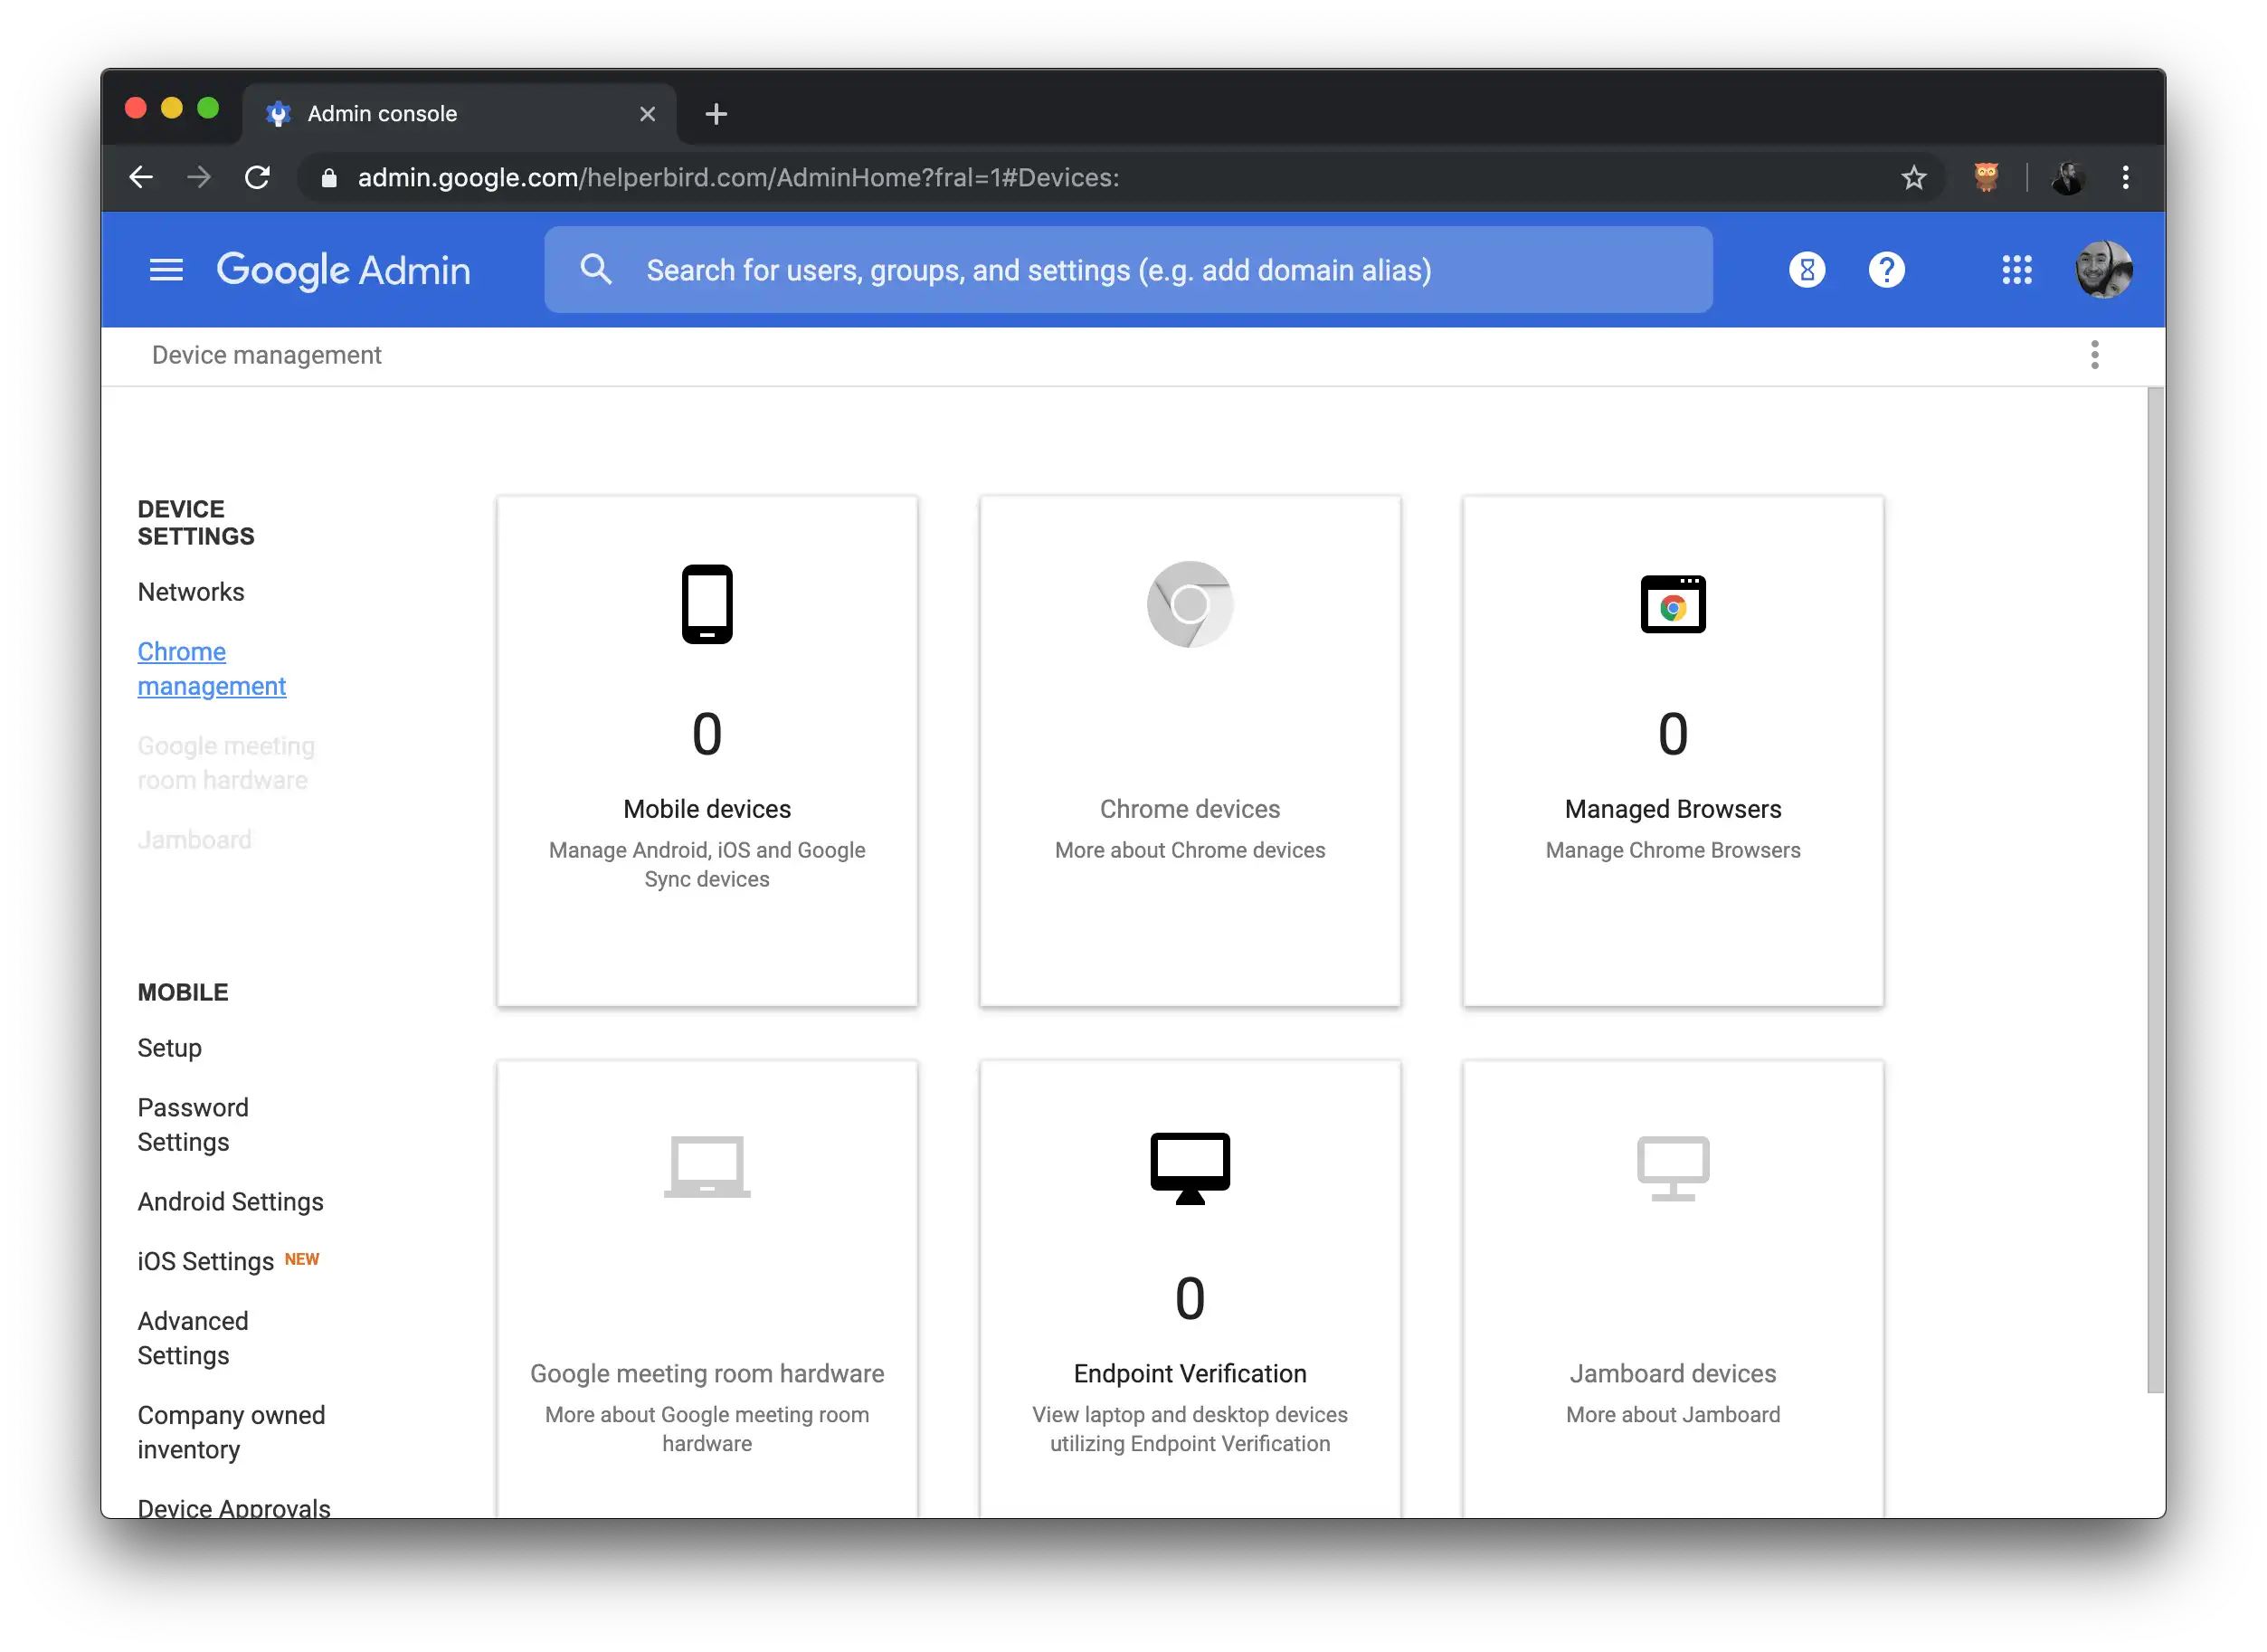 Step two of how to install Helperbird on G Suite